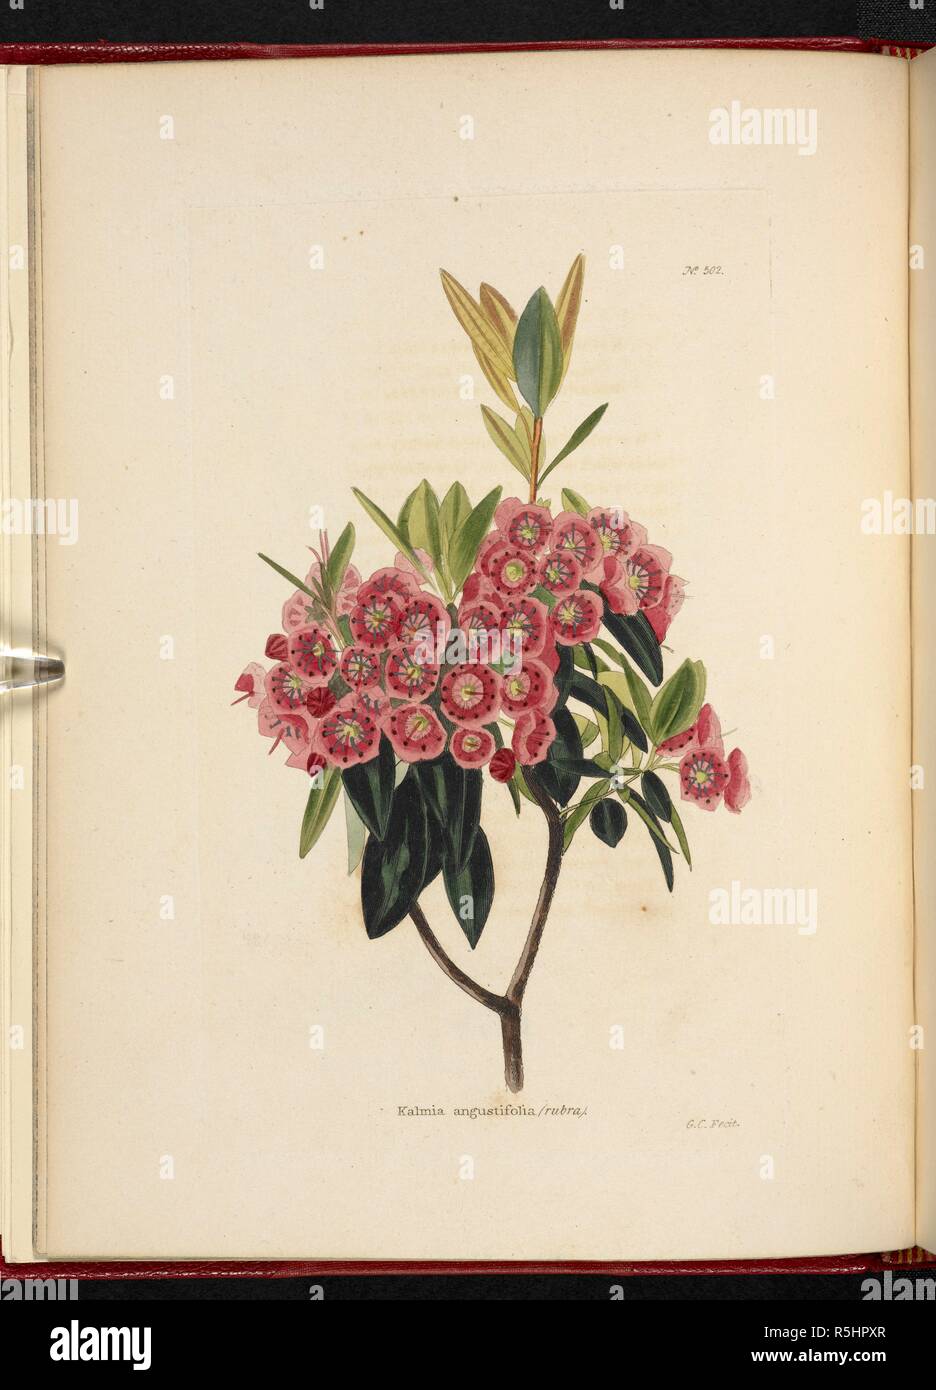 Kalmia angustifolia. The Botanical Cabinet, consisting of coloured delineations of plants, from all countries, with a short account of each, etc. By C. Loddiges and Sons ... The plates by G. Cooke. vol. 1-20. London, 1817-33. Source: 443.b.10, vol.6, no.502. Author: Cooke, George. Stock Photo